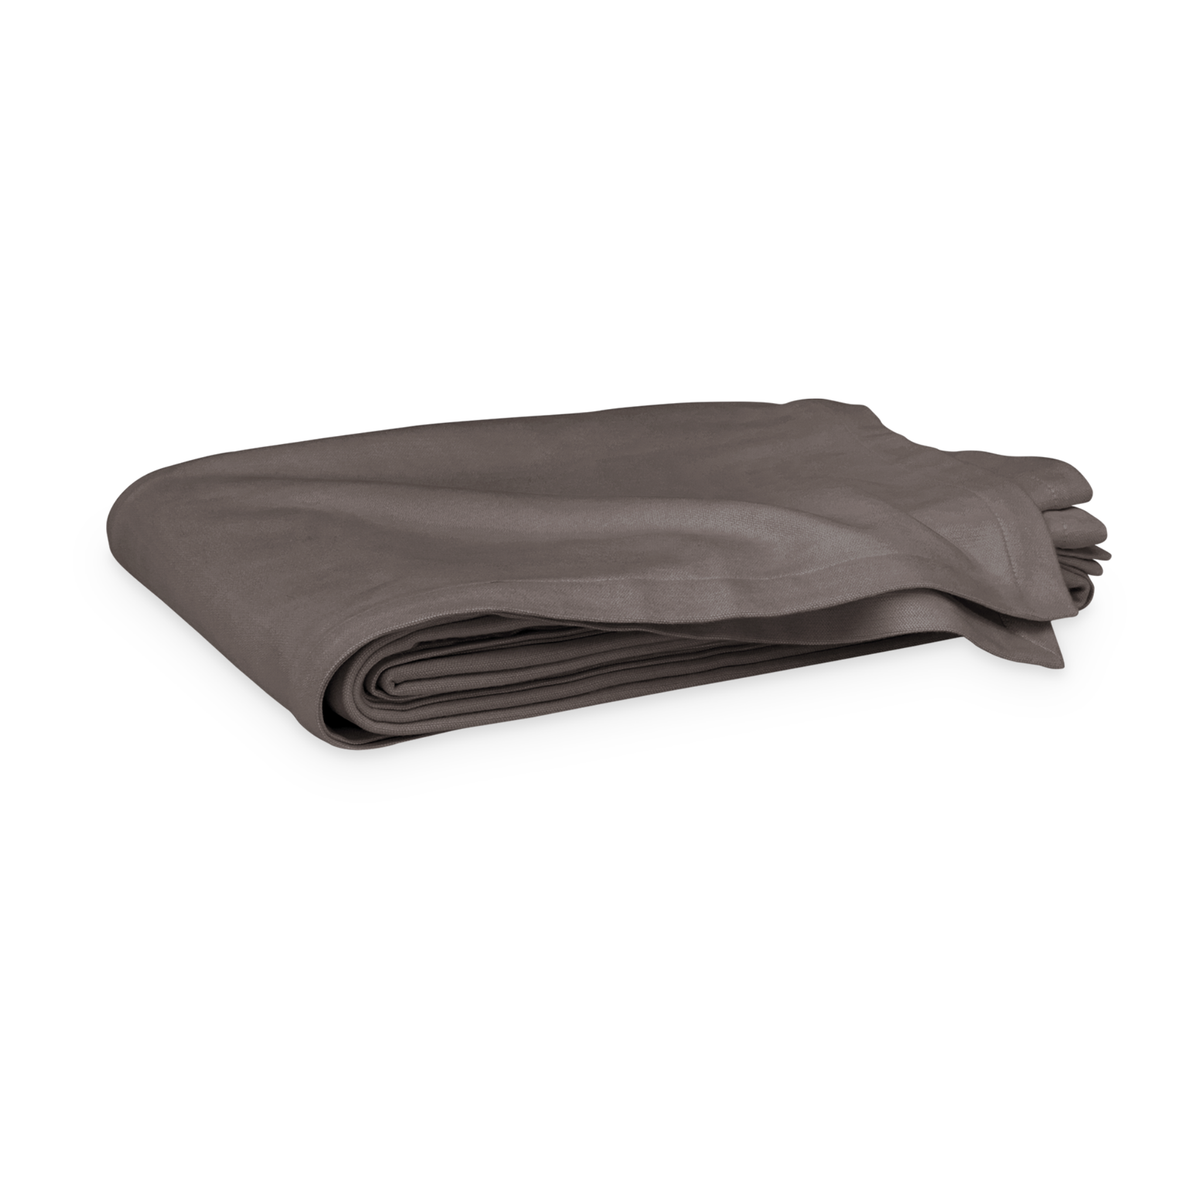 Folded Blanket of Matouk Dream Modal Collection in Charcoal Color